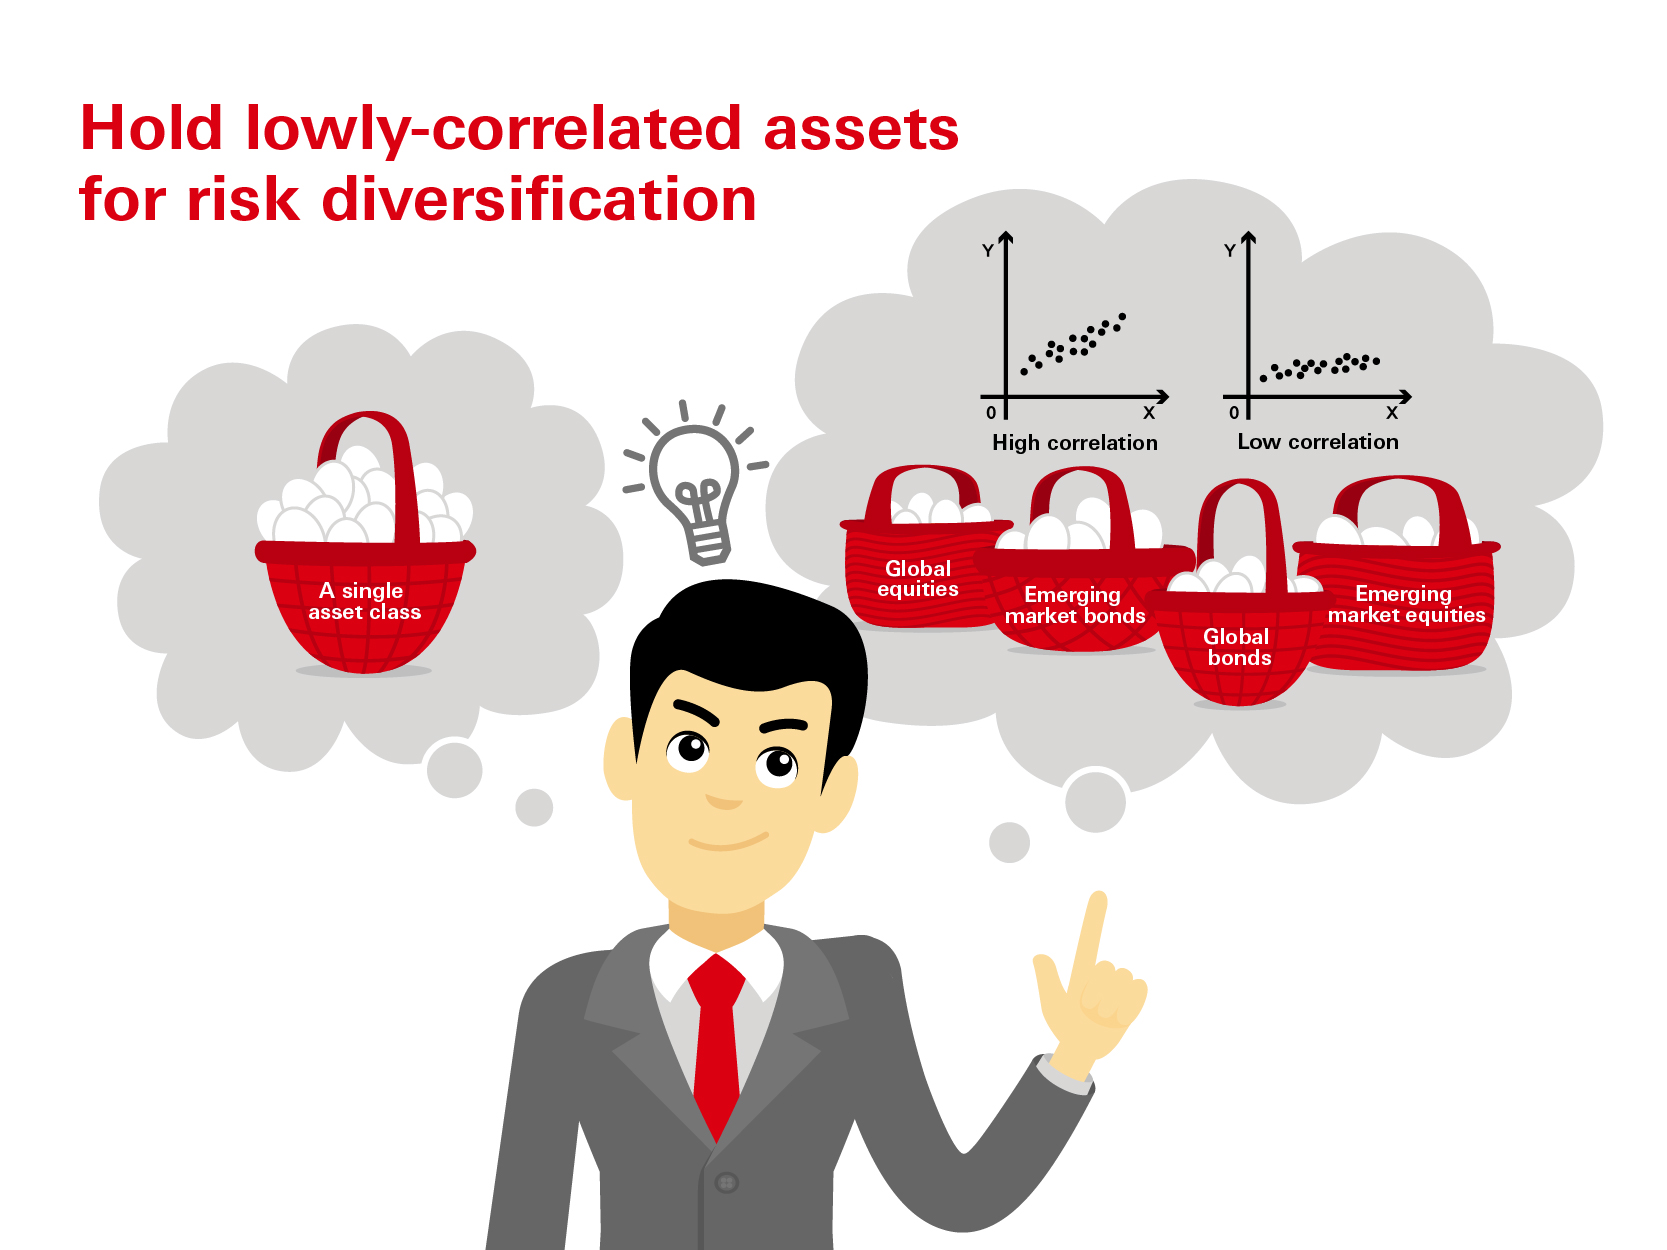 As a rule of thumb, building a highly diversified portfolio helps generate relatively more stable, long-term returns. 